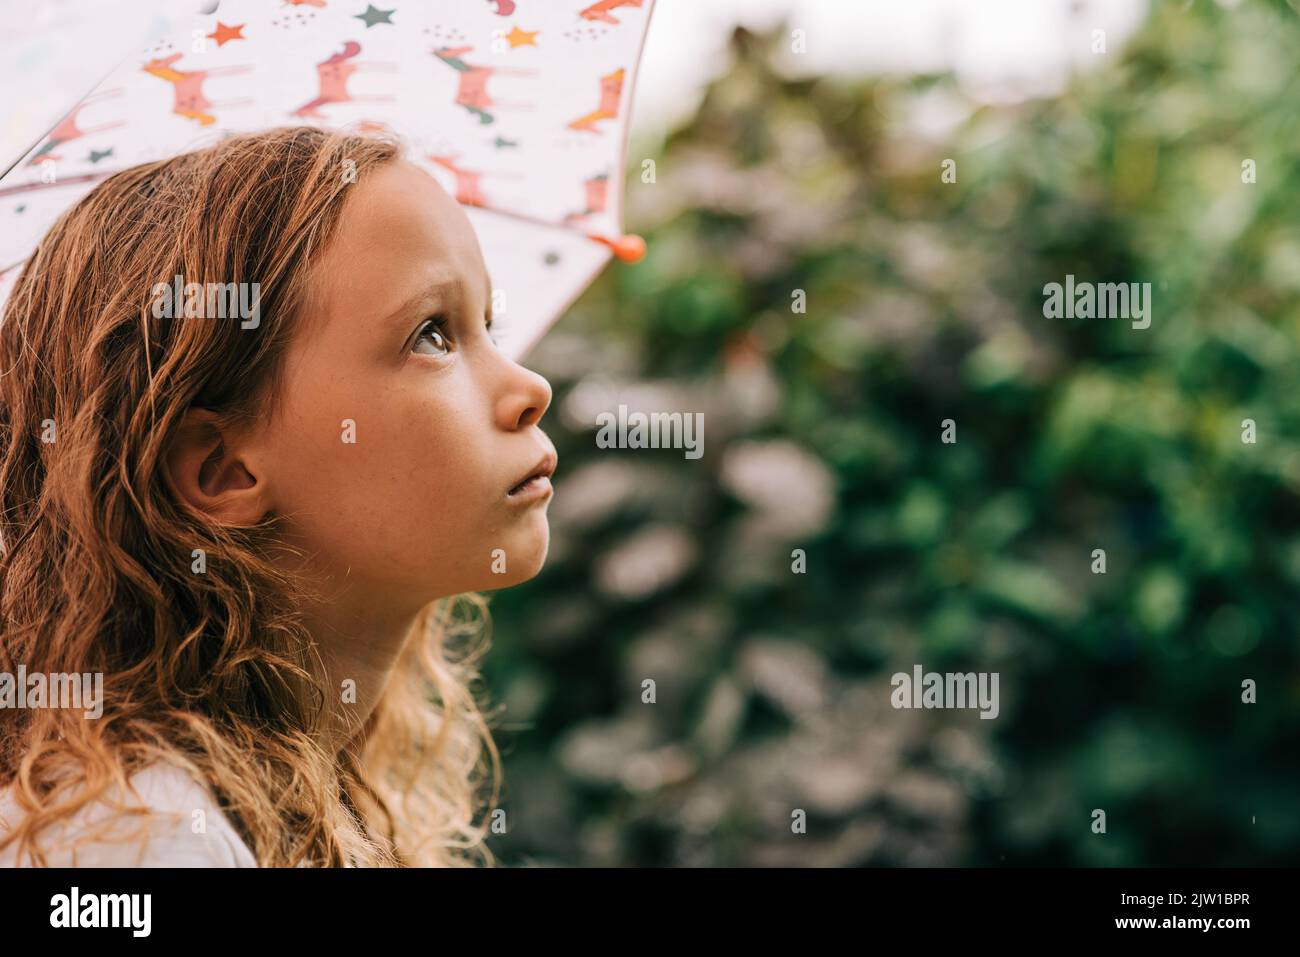 portrait of a girl holding an umbrella outside in the rain Stock Photo